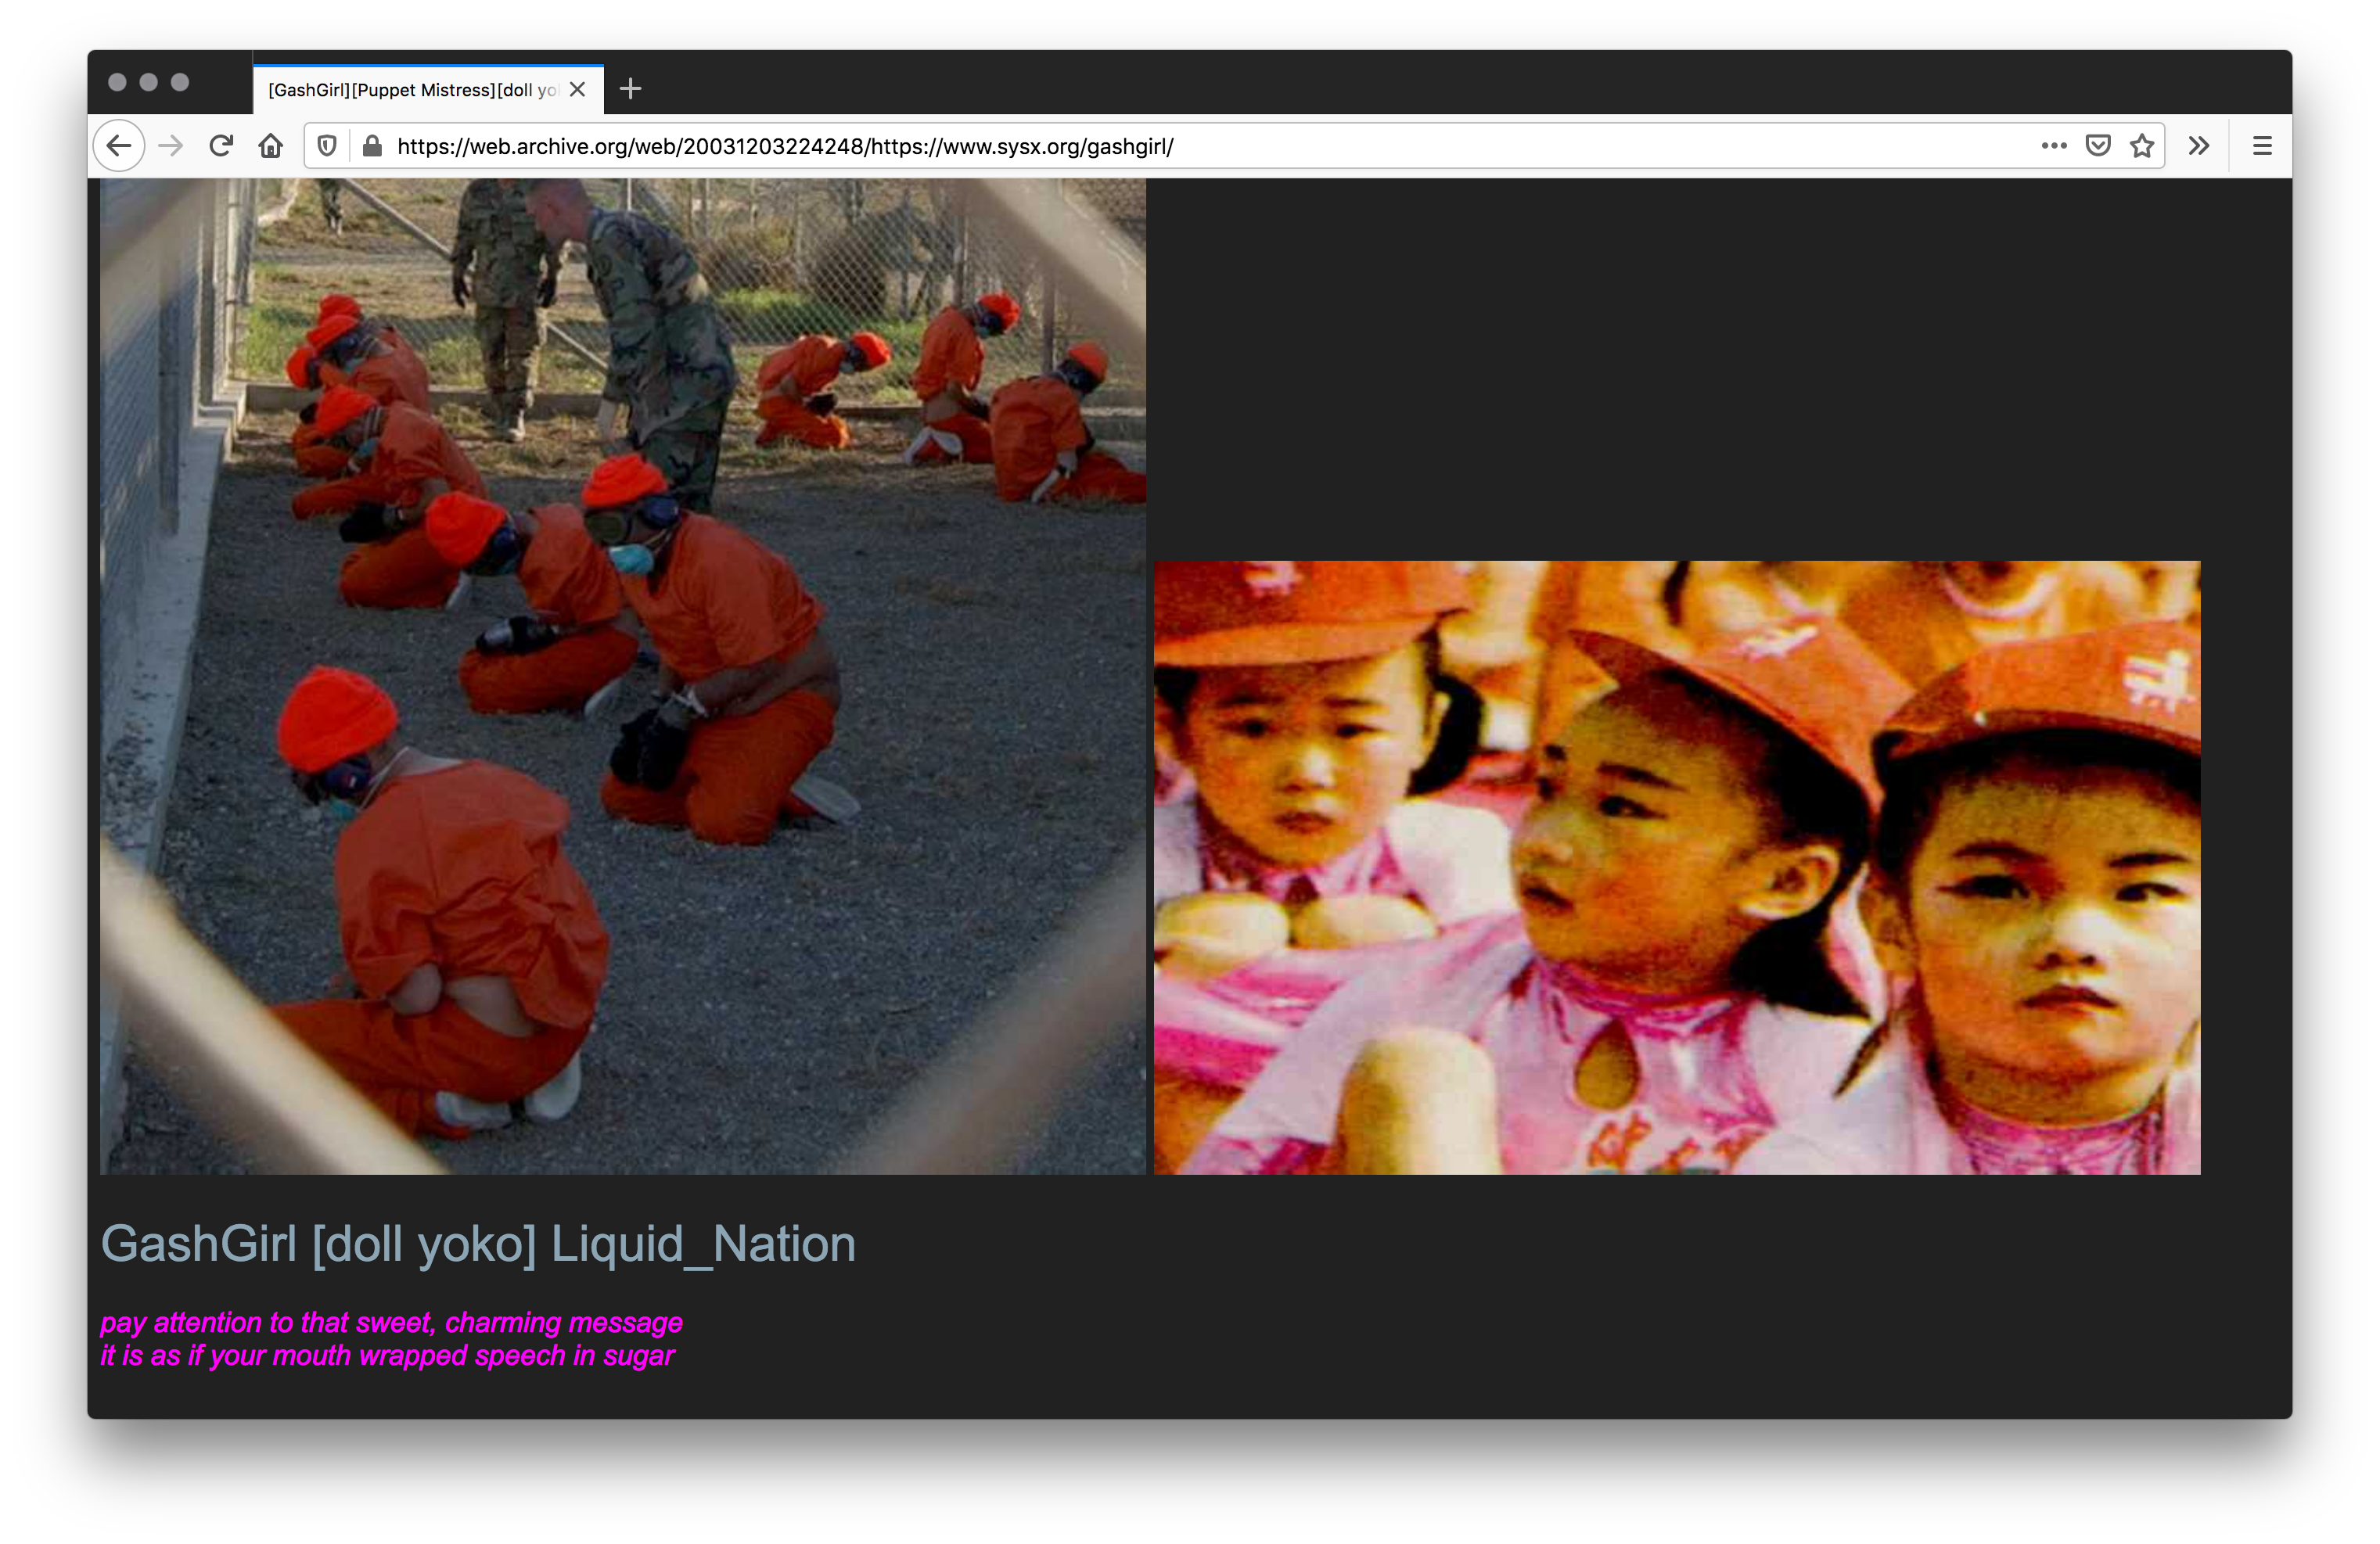 Screenshot of webpage with an image of inmates sitting helplessly on their crossed legs, wearing masks, goggles while army men yell at them next to an old image of Asian school pre-school girls wearing orange hats and pink uniforms sitting in an assembly.